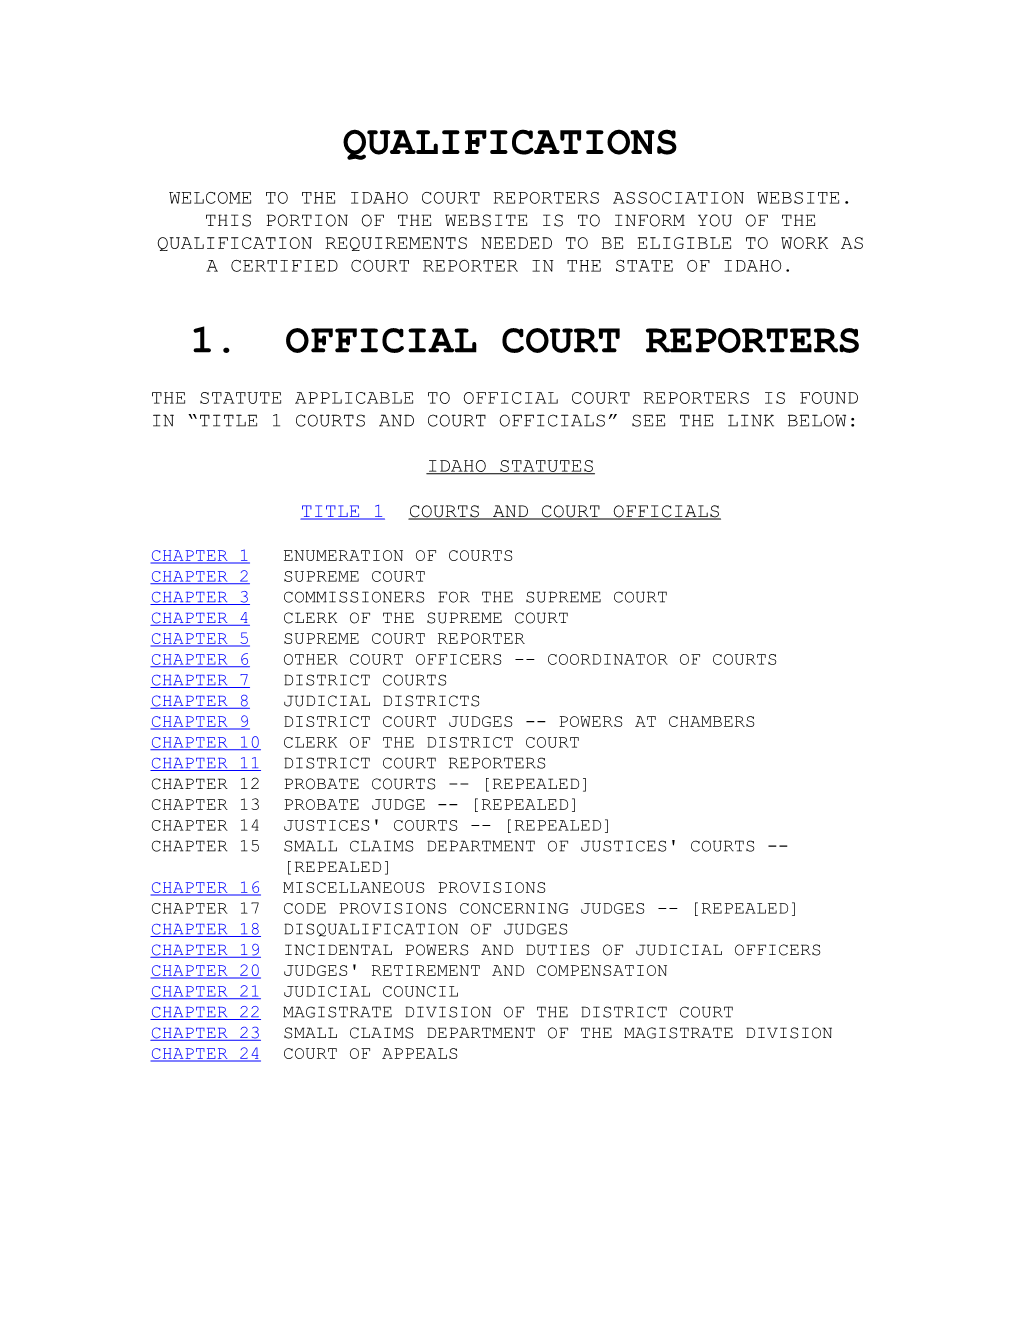 Welcome to the Idaho Court Reporters Association Website. This Portion of the Website Is